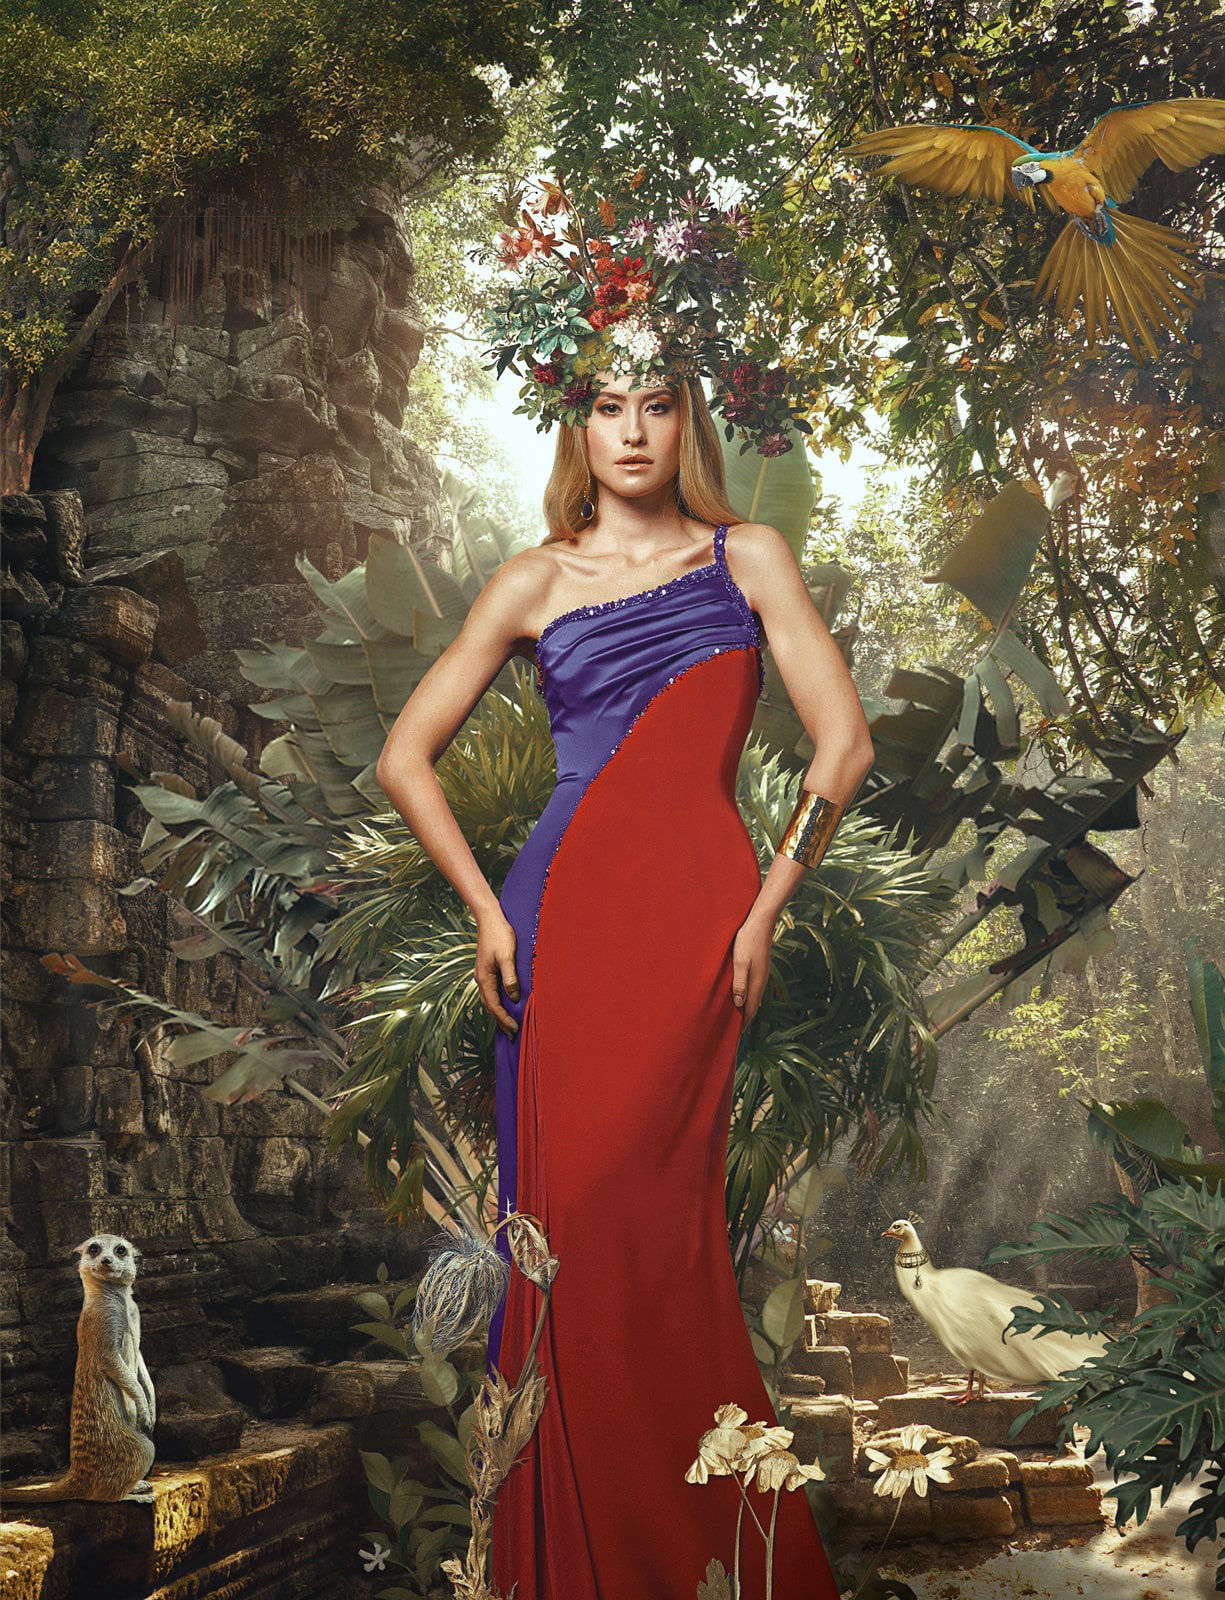 Painterly image of a model wearing a red dress surrounded by nature 